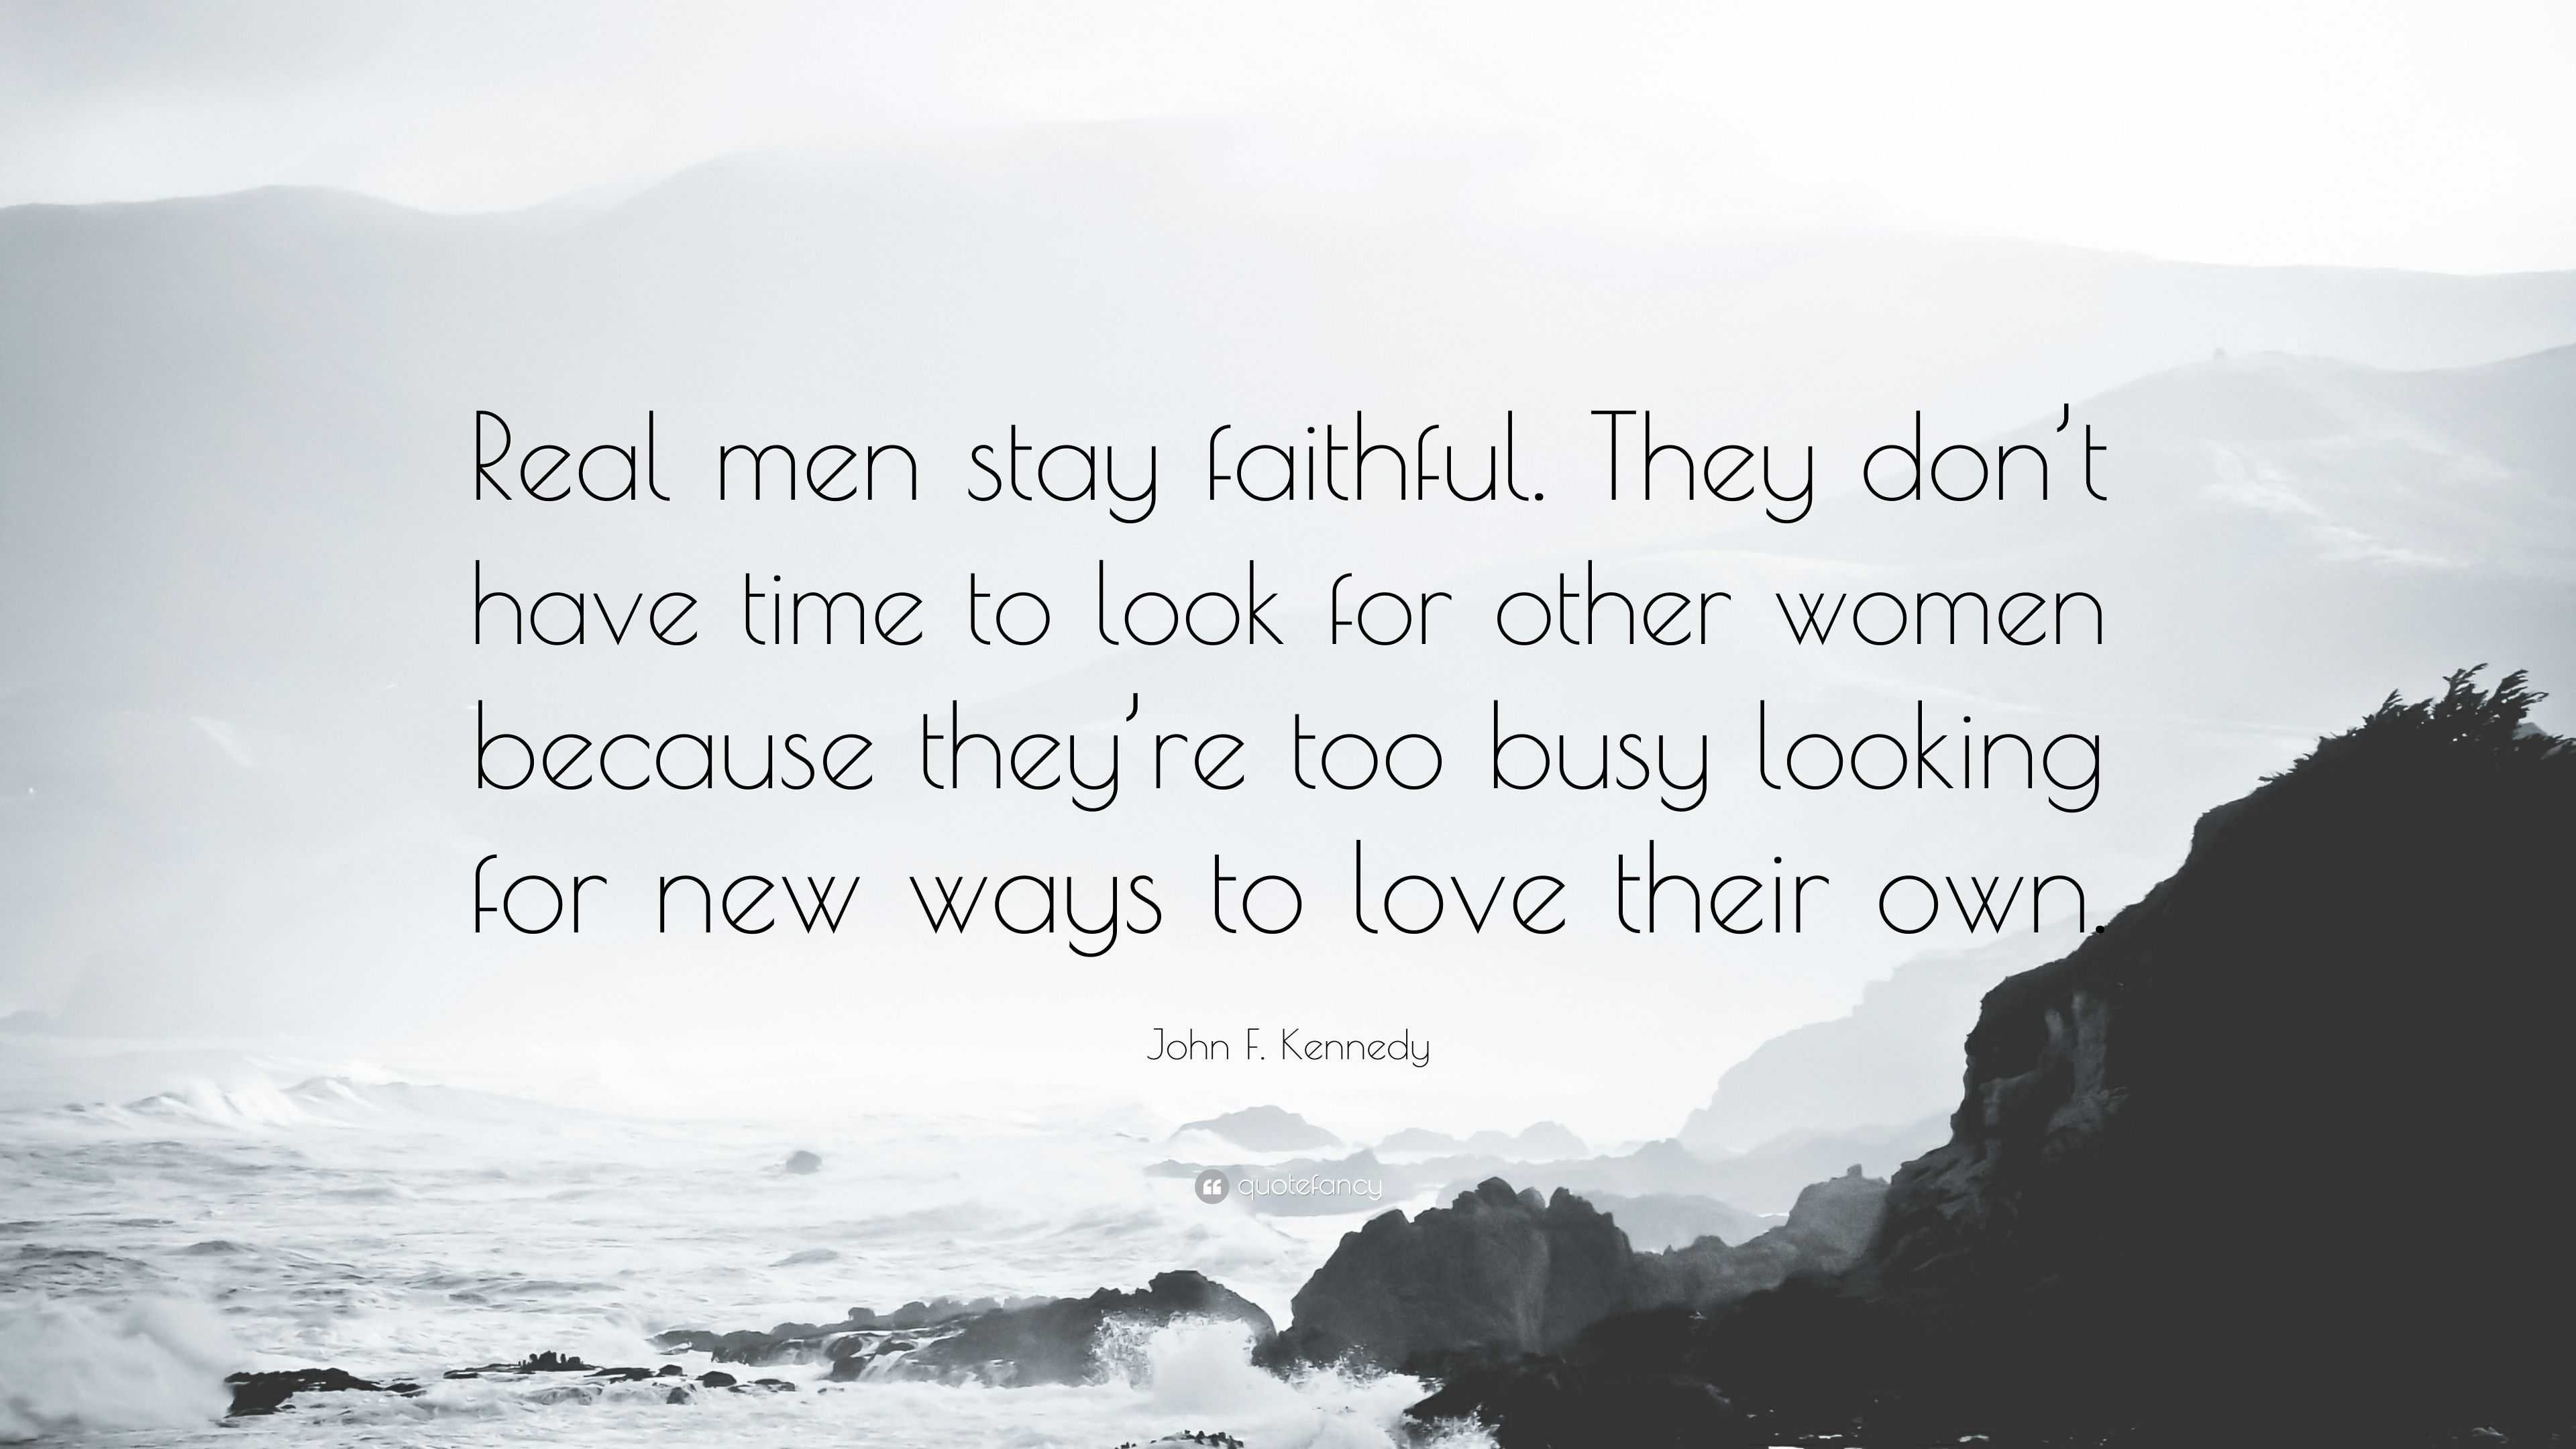 John F. Kennedy Quote: “Real men stay faithful. They don't have time to look  for other women because they're too busy looking for new ways to lo”